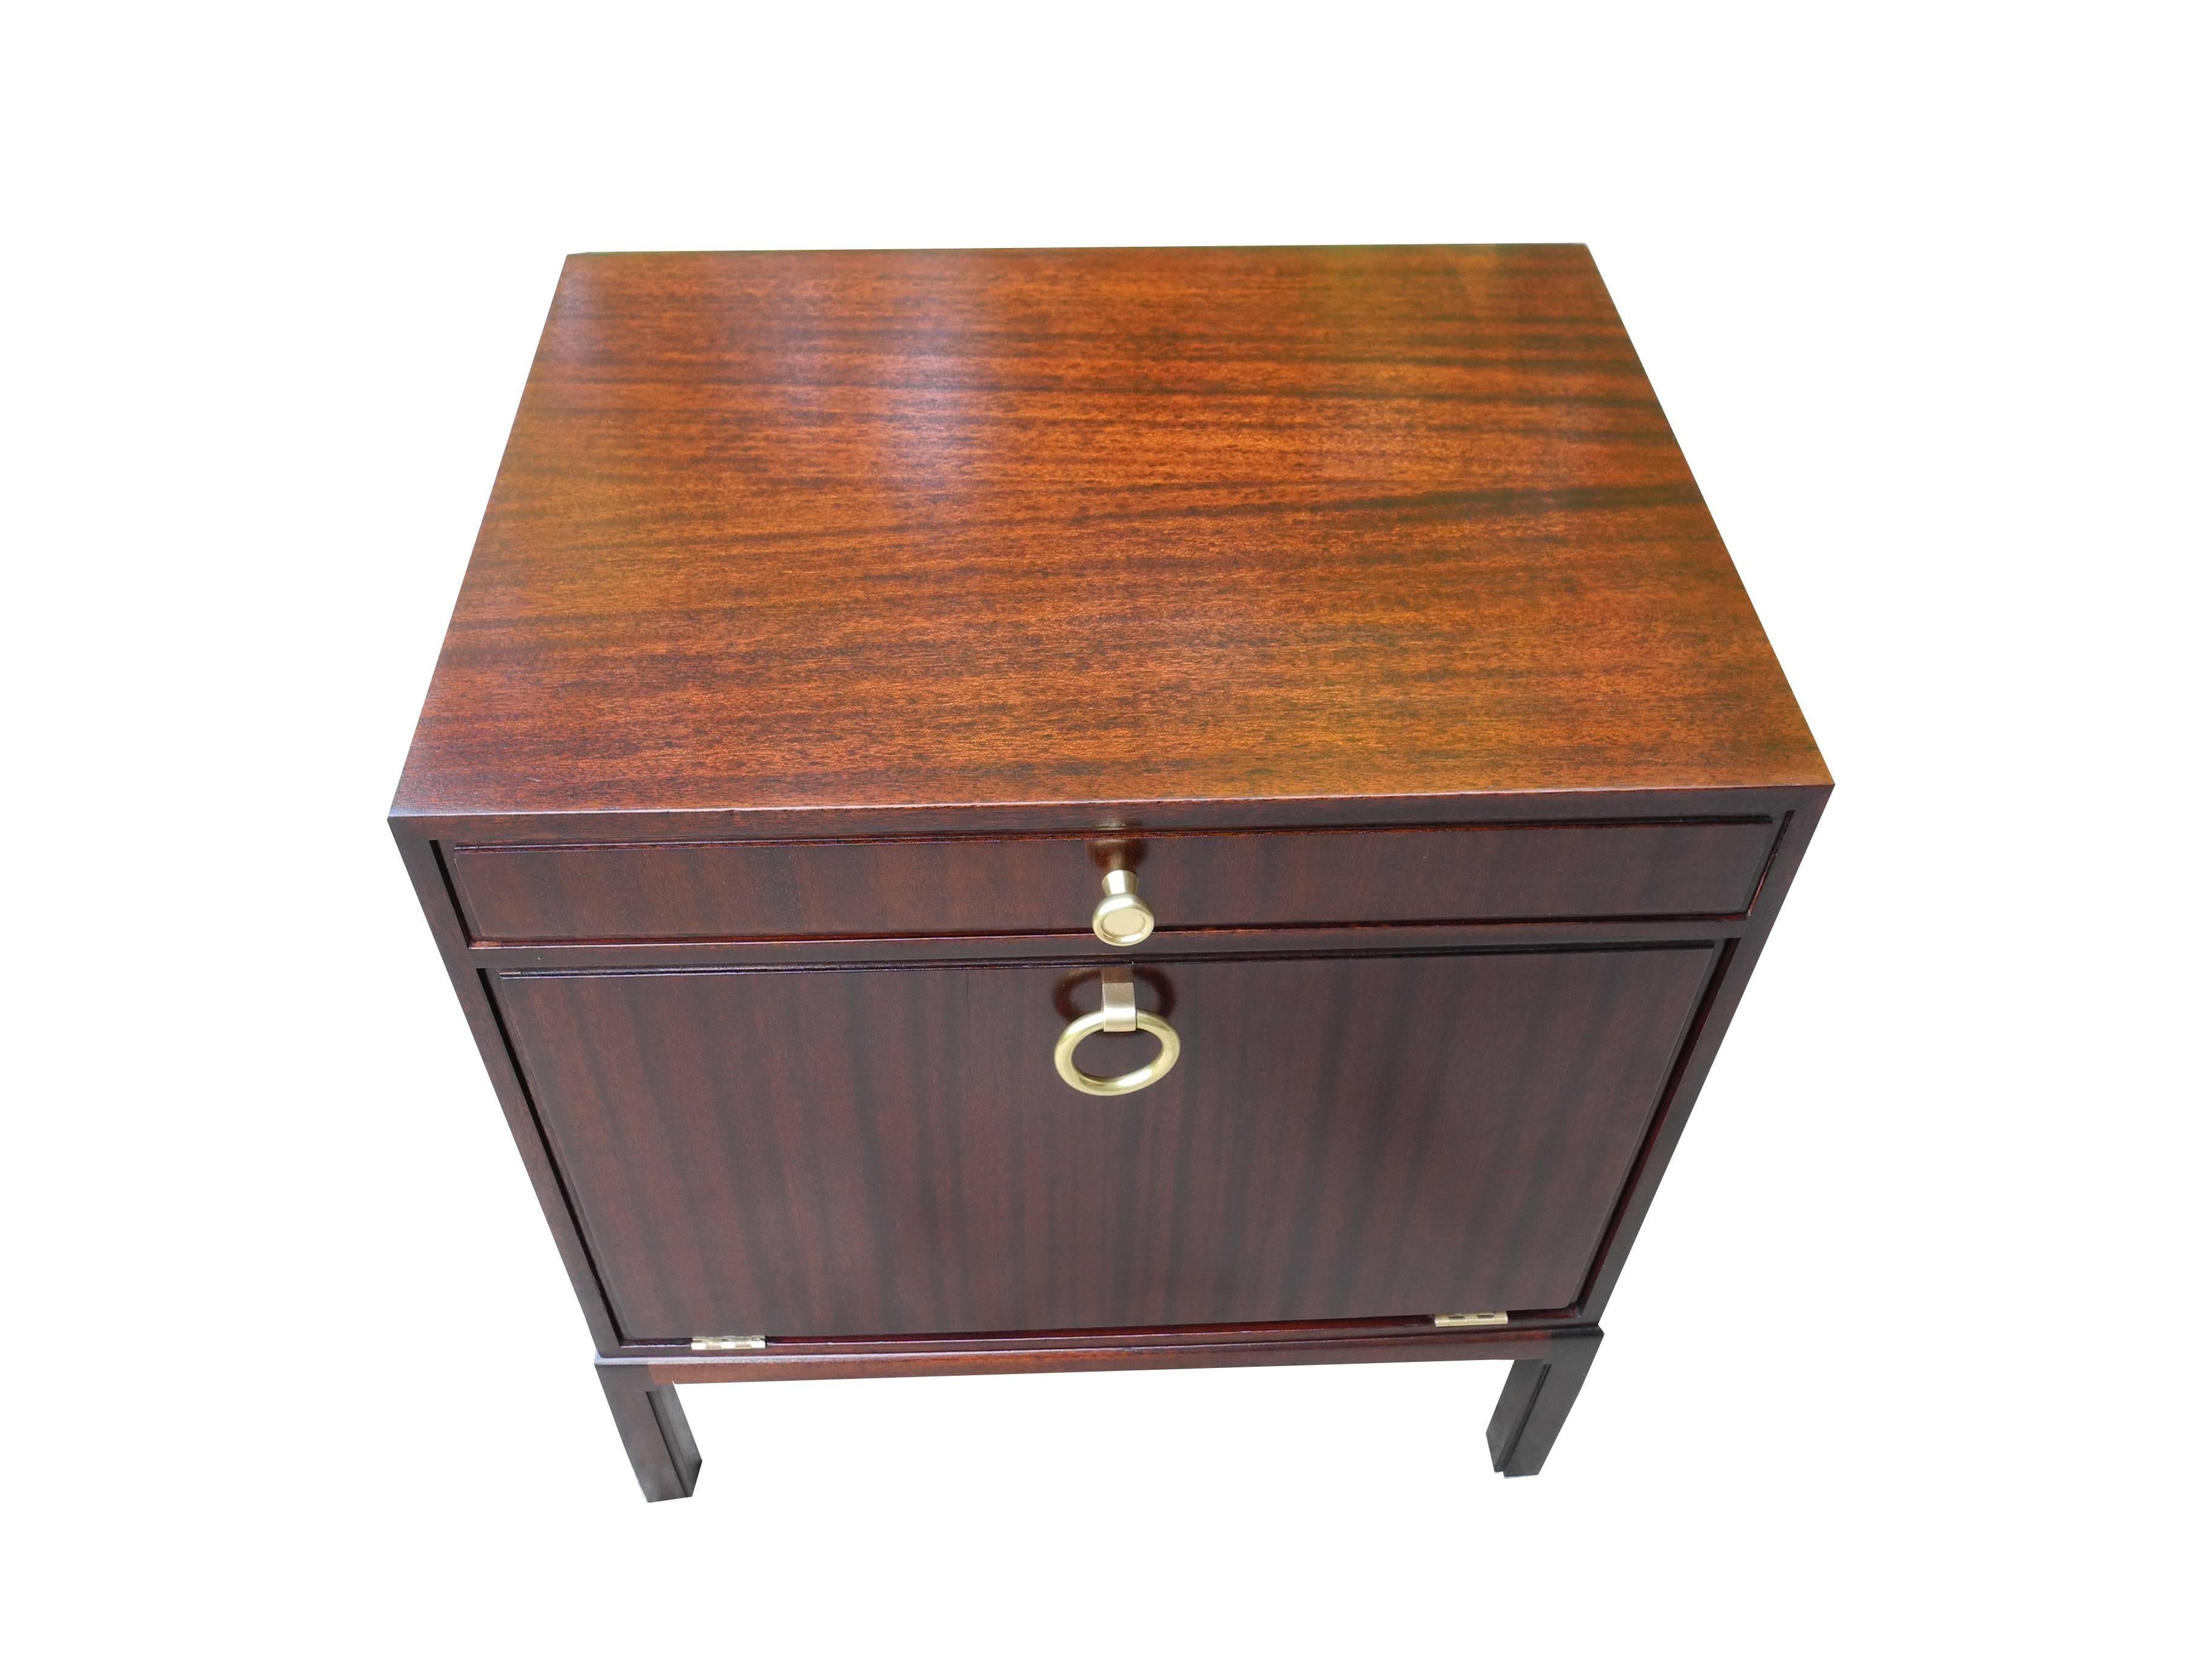 Single Mahogany Modern Nightstand by Tommi Parzinger for Charak Modern In Excellent Condition For Sale In Hudson, NY